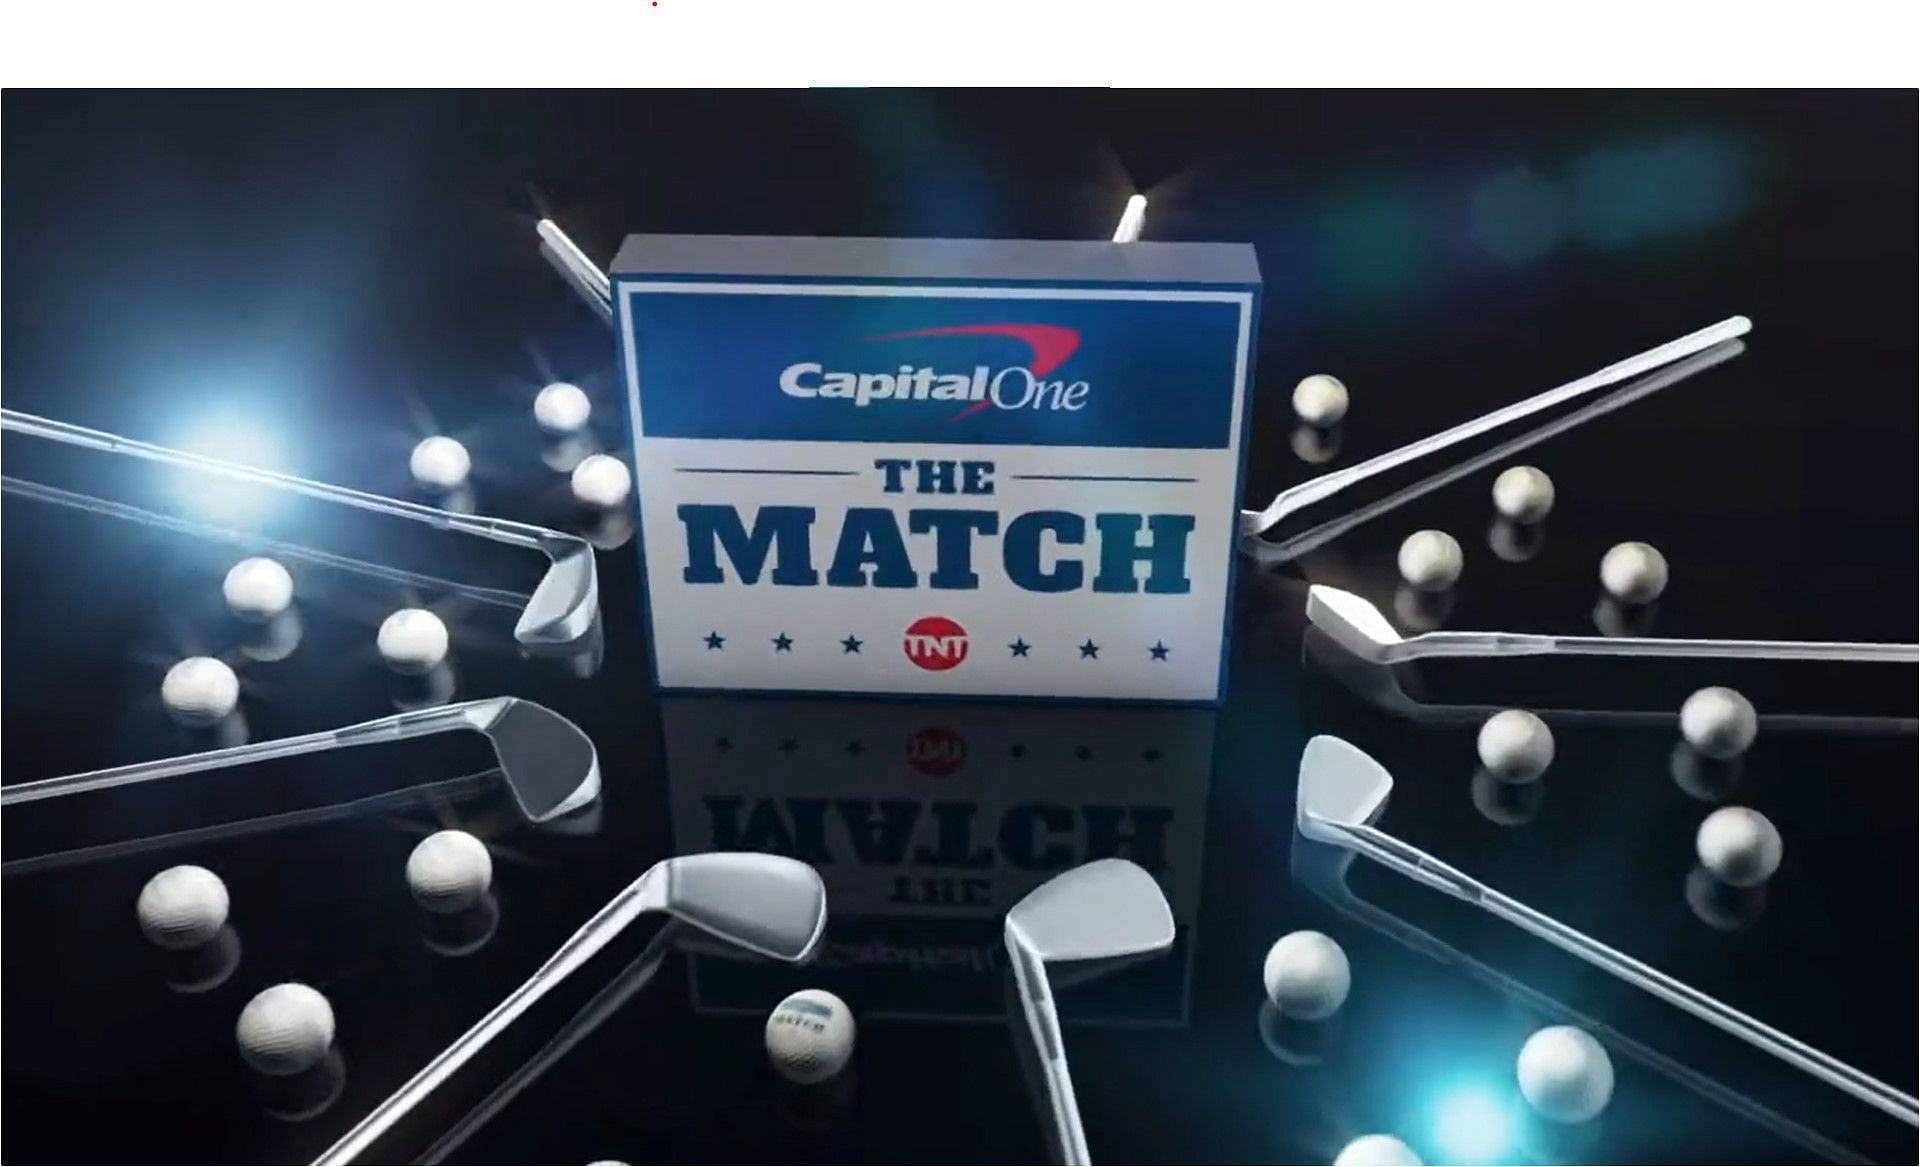 The Capital One